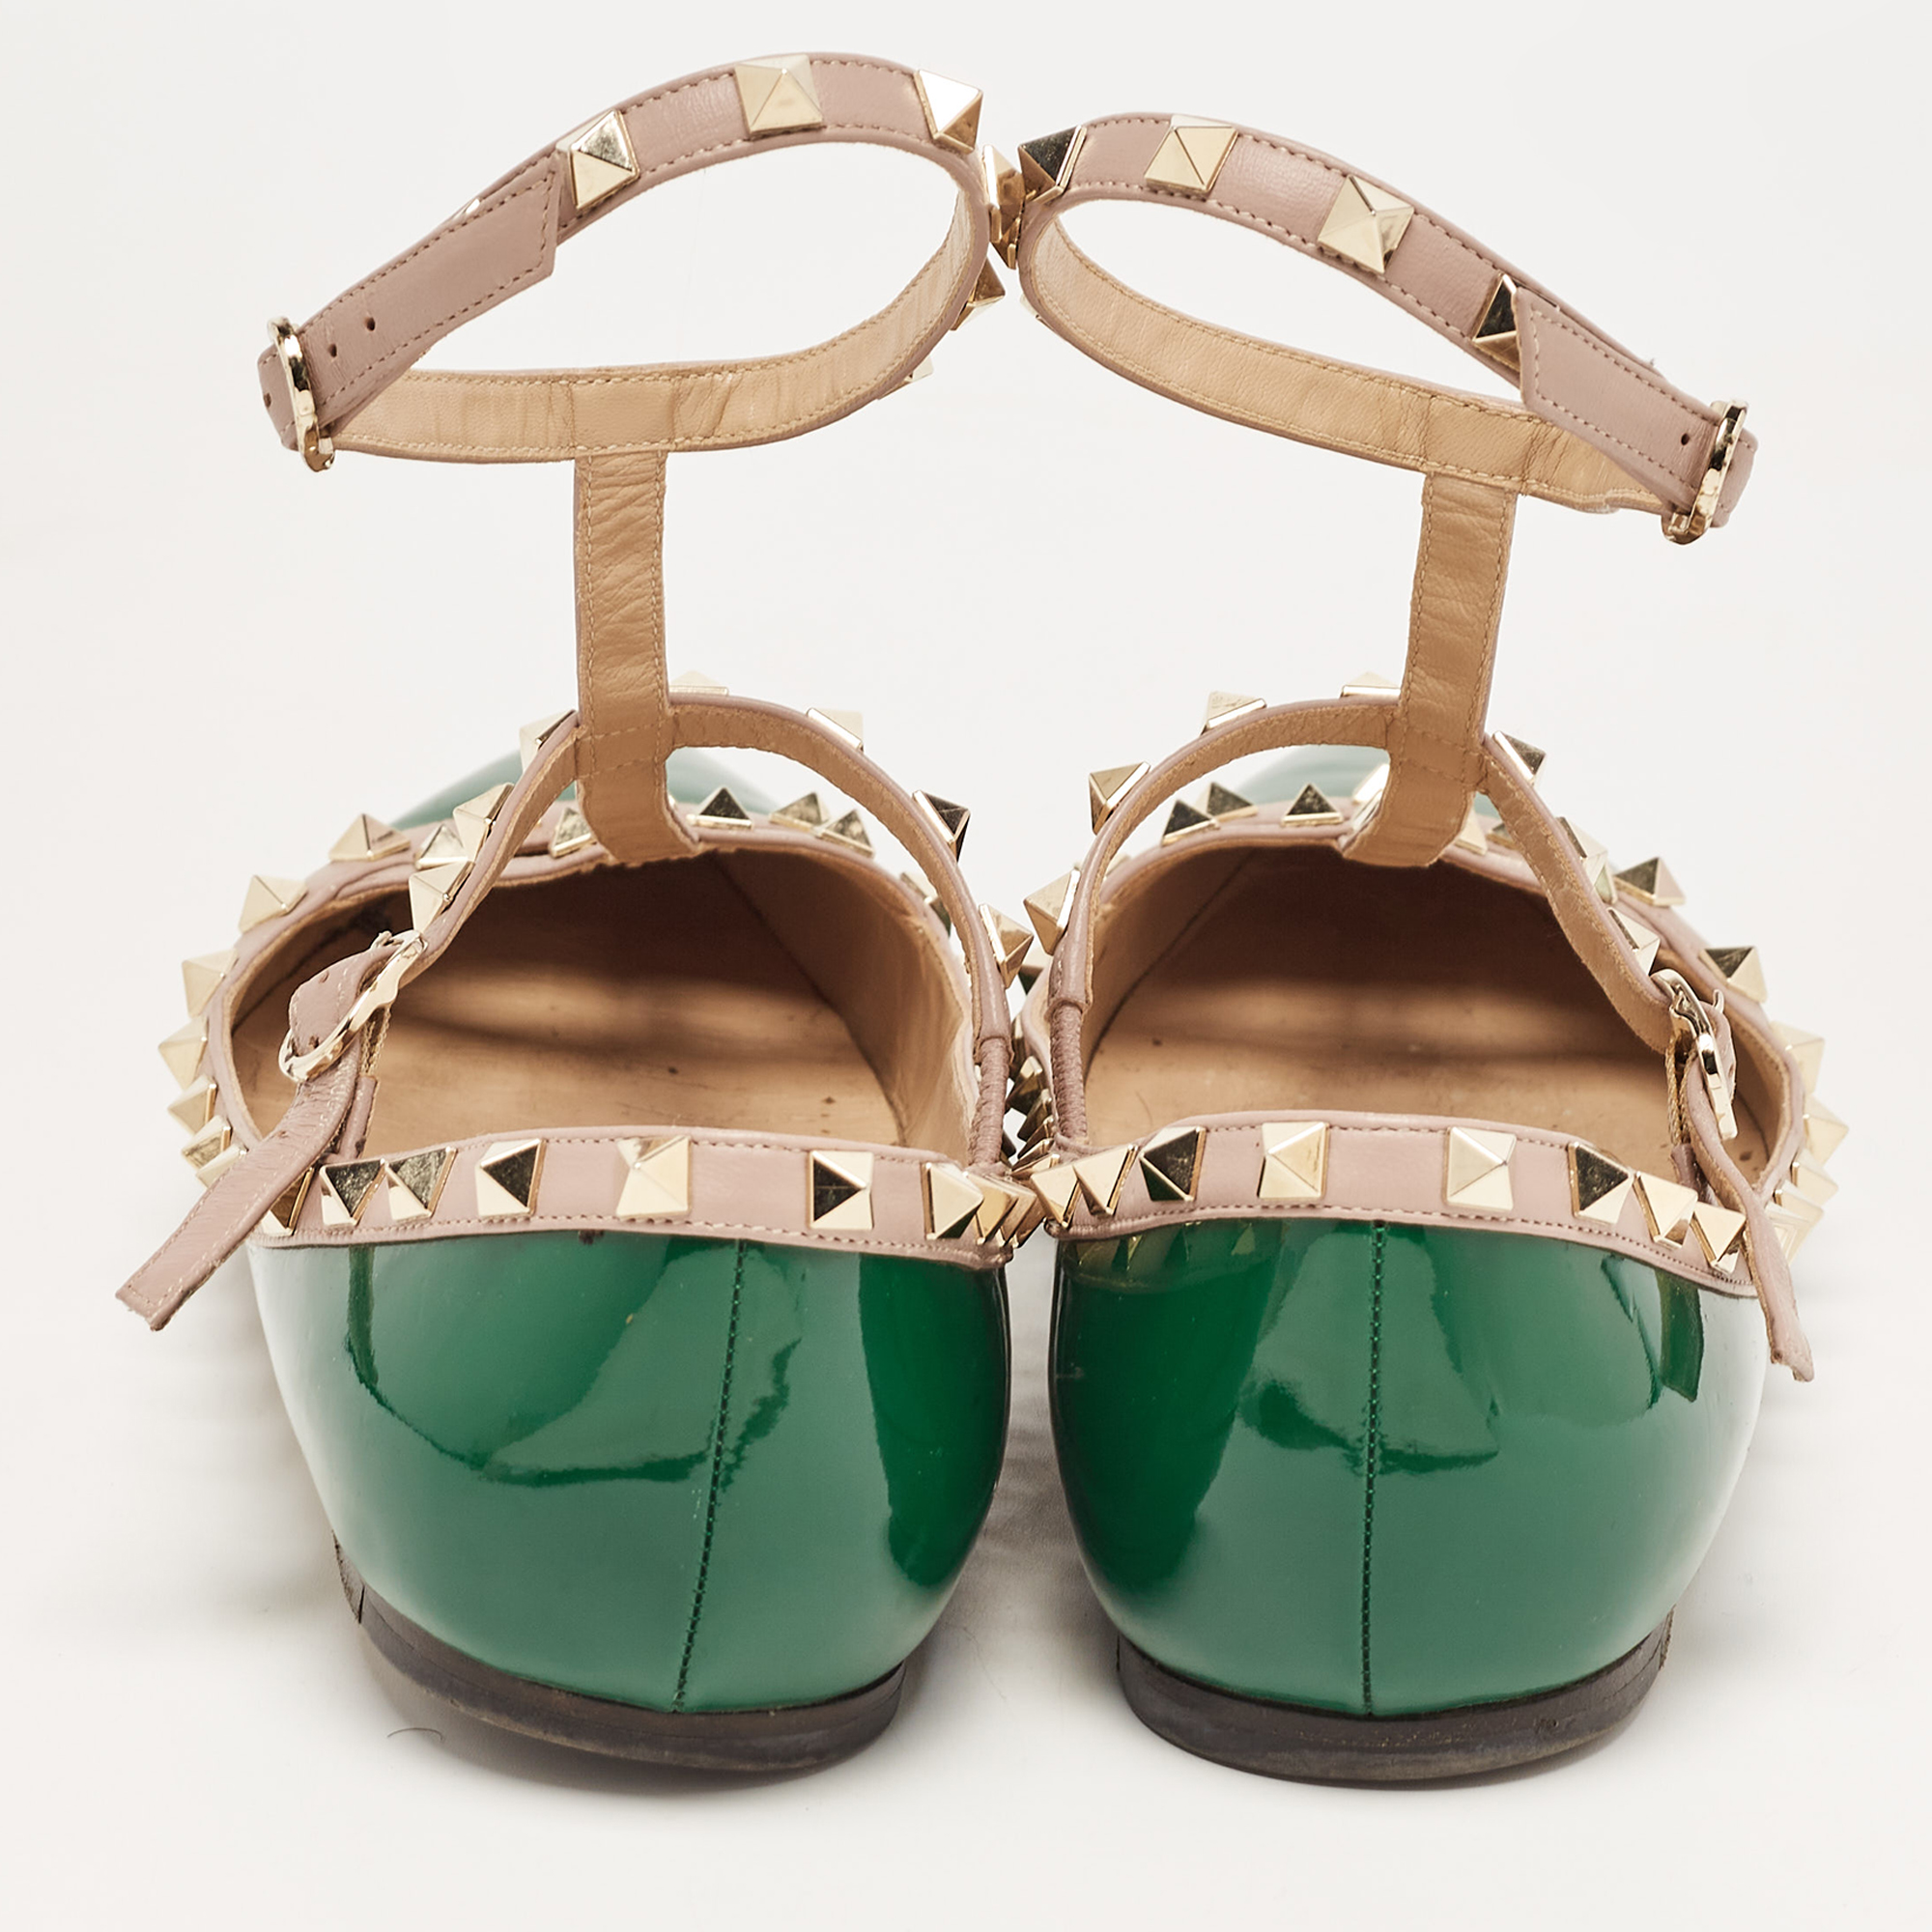 Valentino Green Patent Leather Rockstud Ankle Strap Ballet Flats Size 41